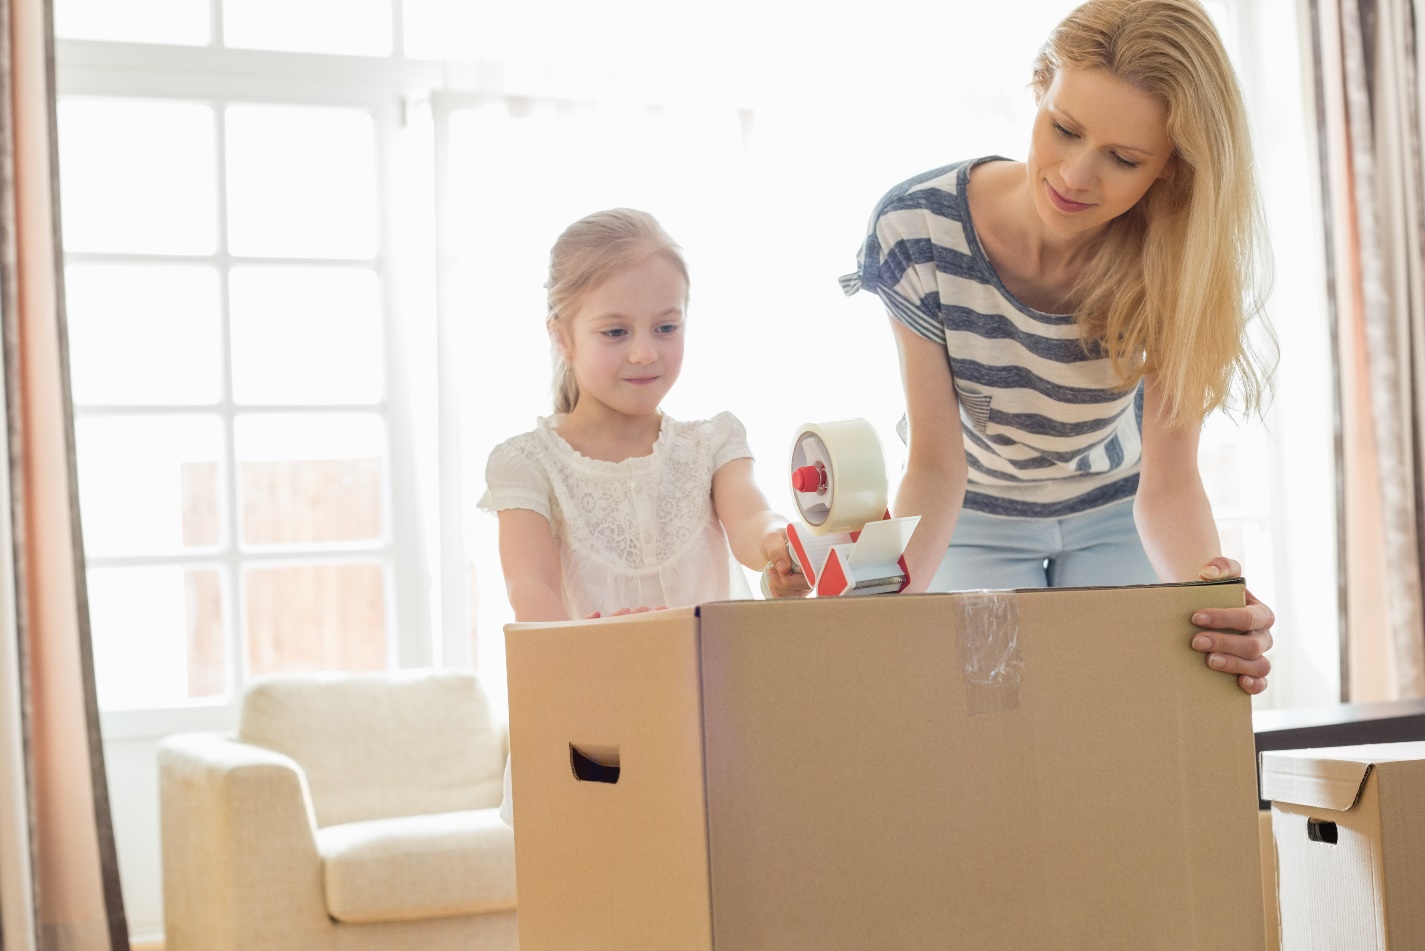 How Does Relocation Impact Child Custody?